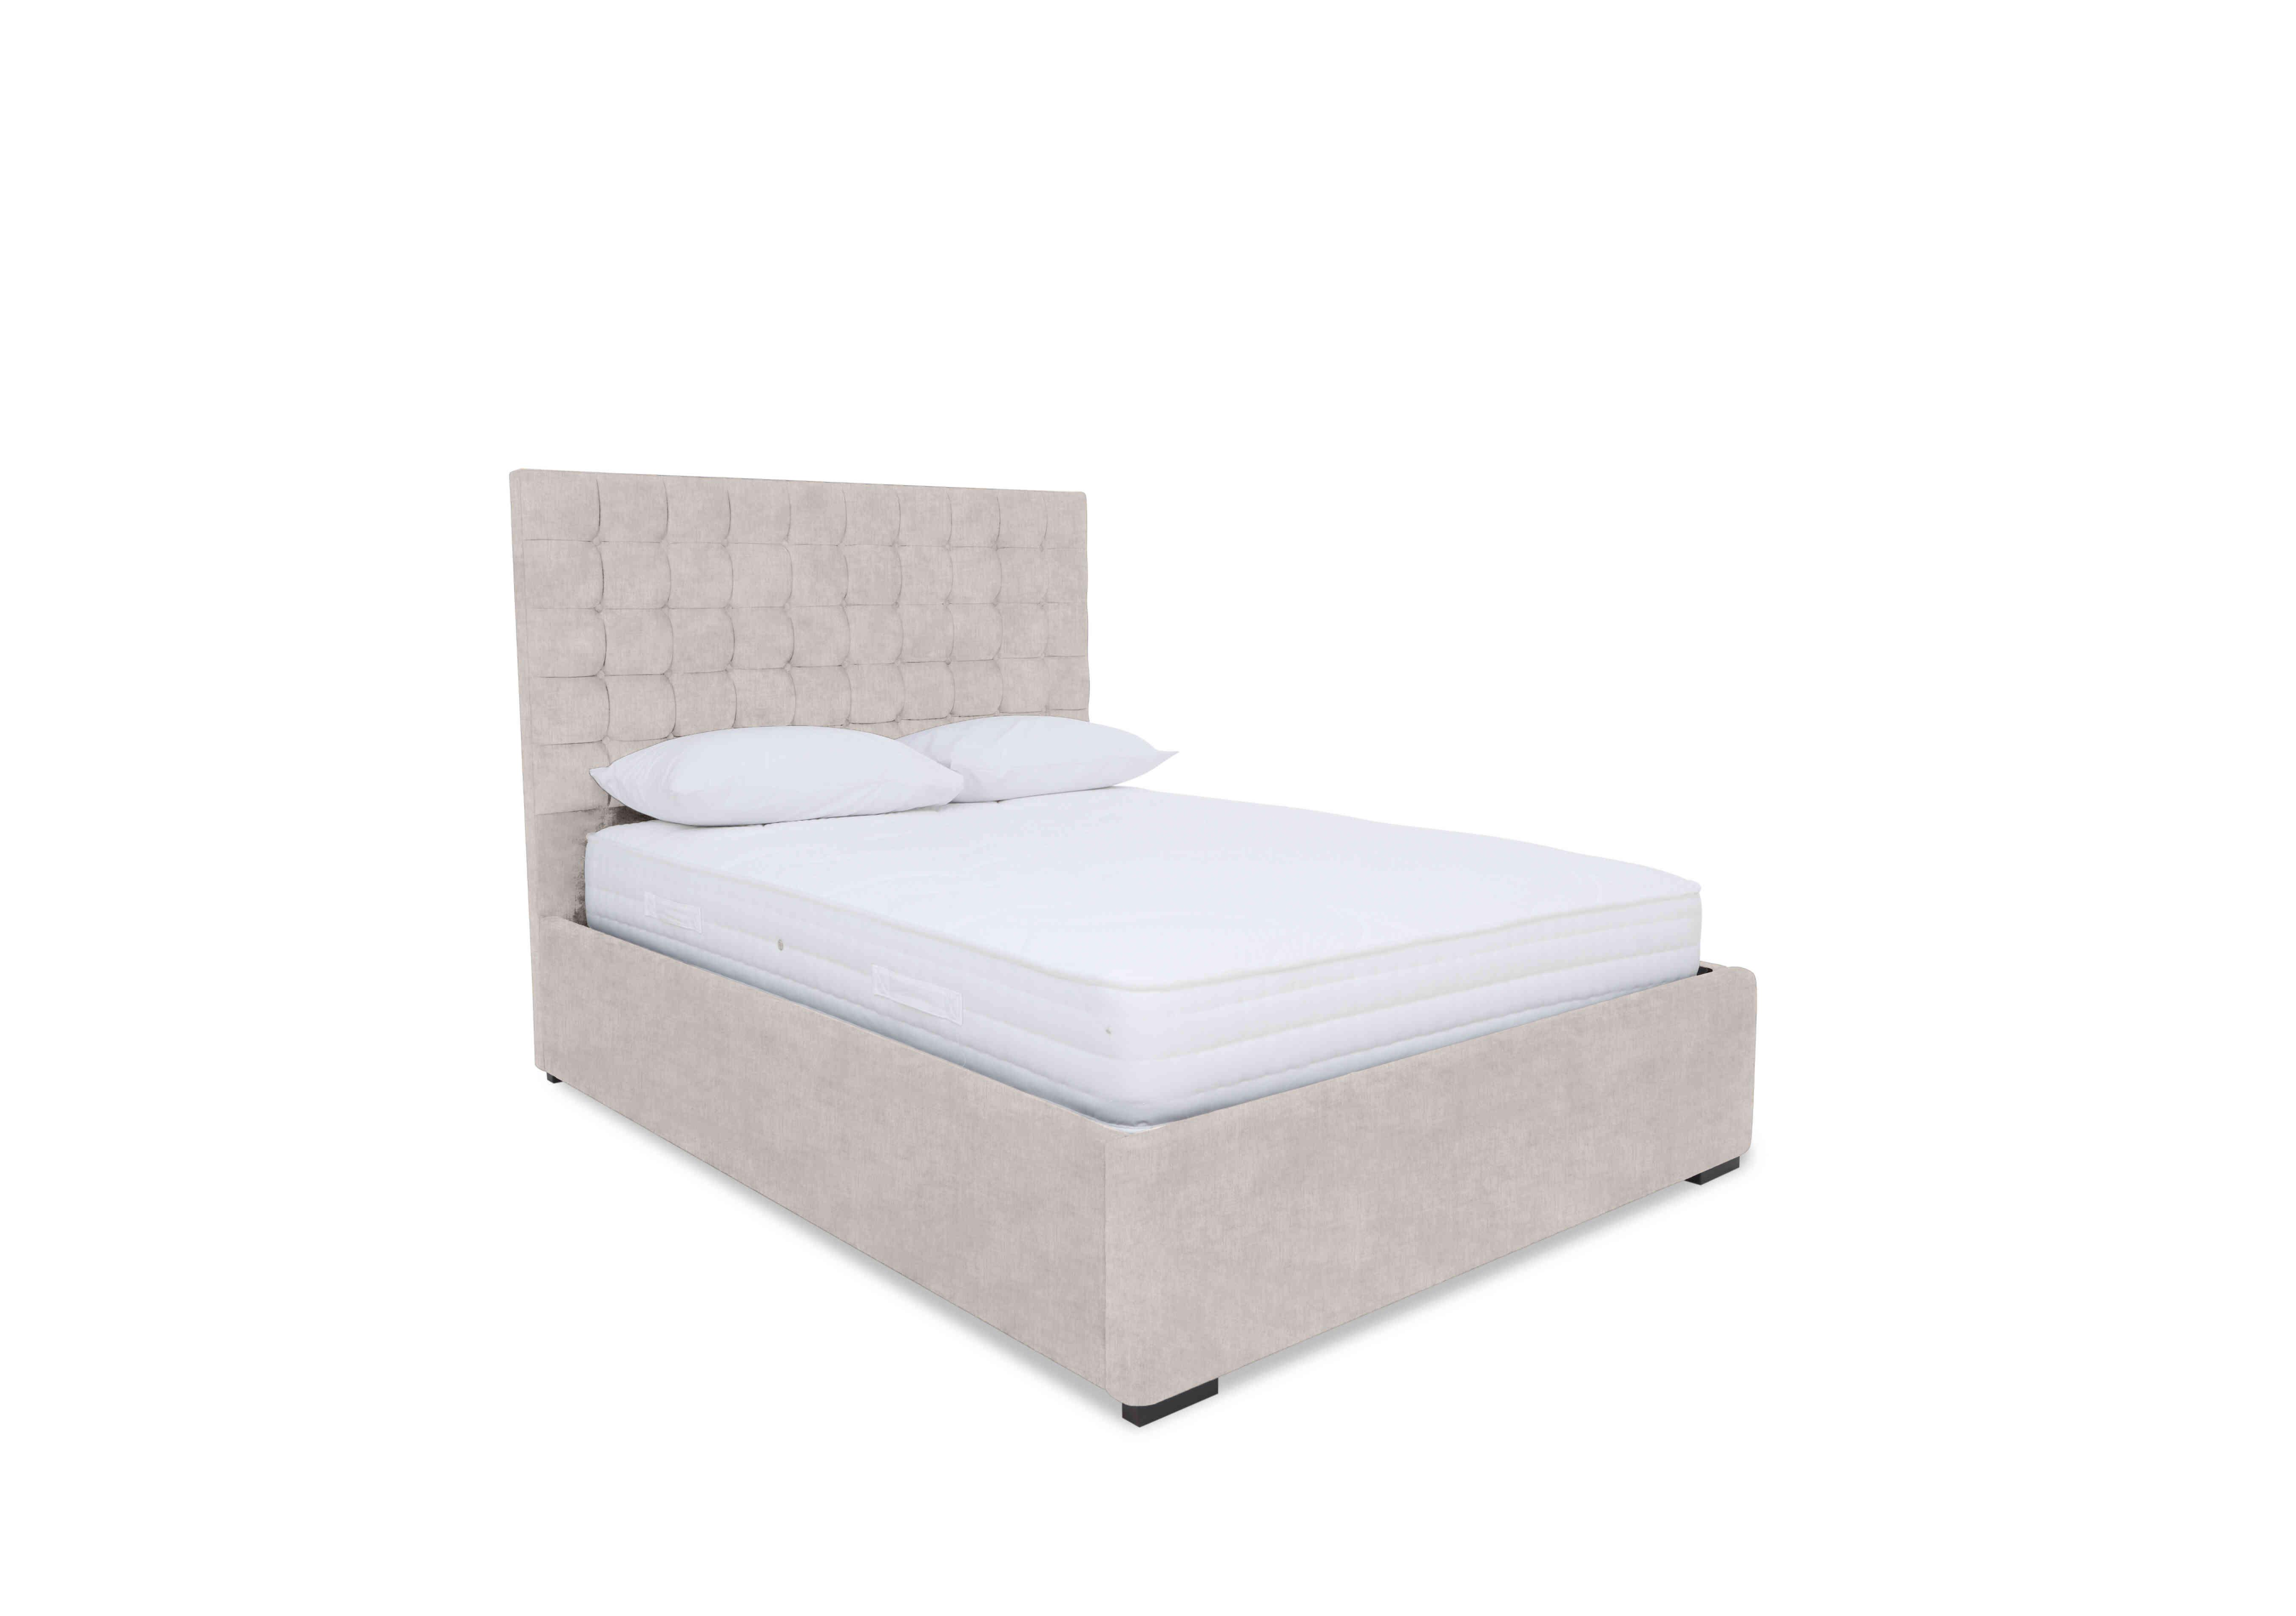 Dice Ottoman Bed Frame in Lace Ivory on Furniture Village